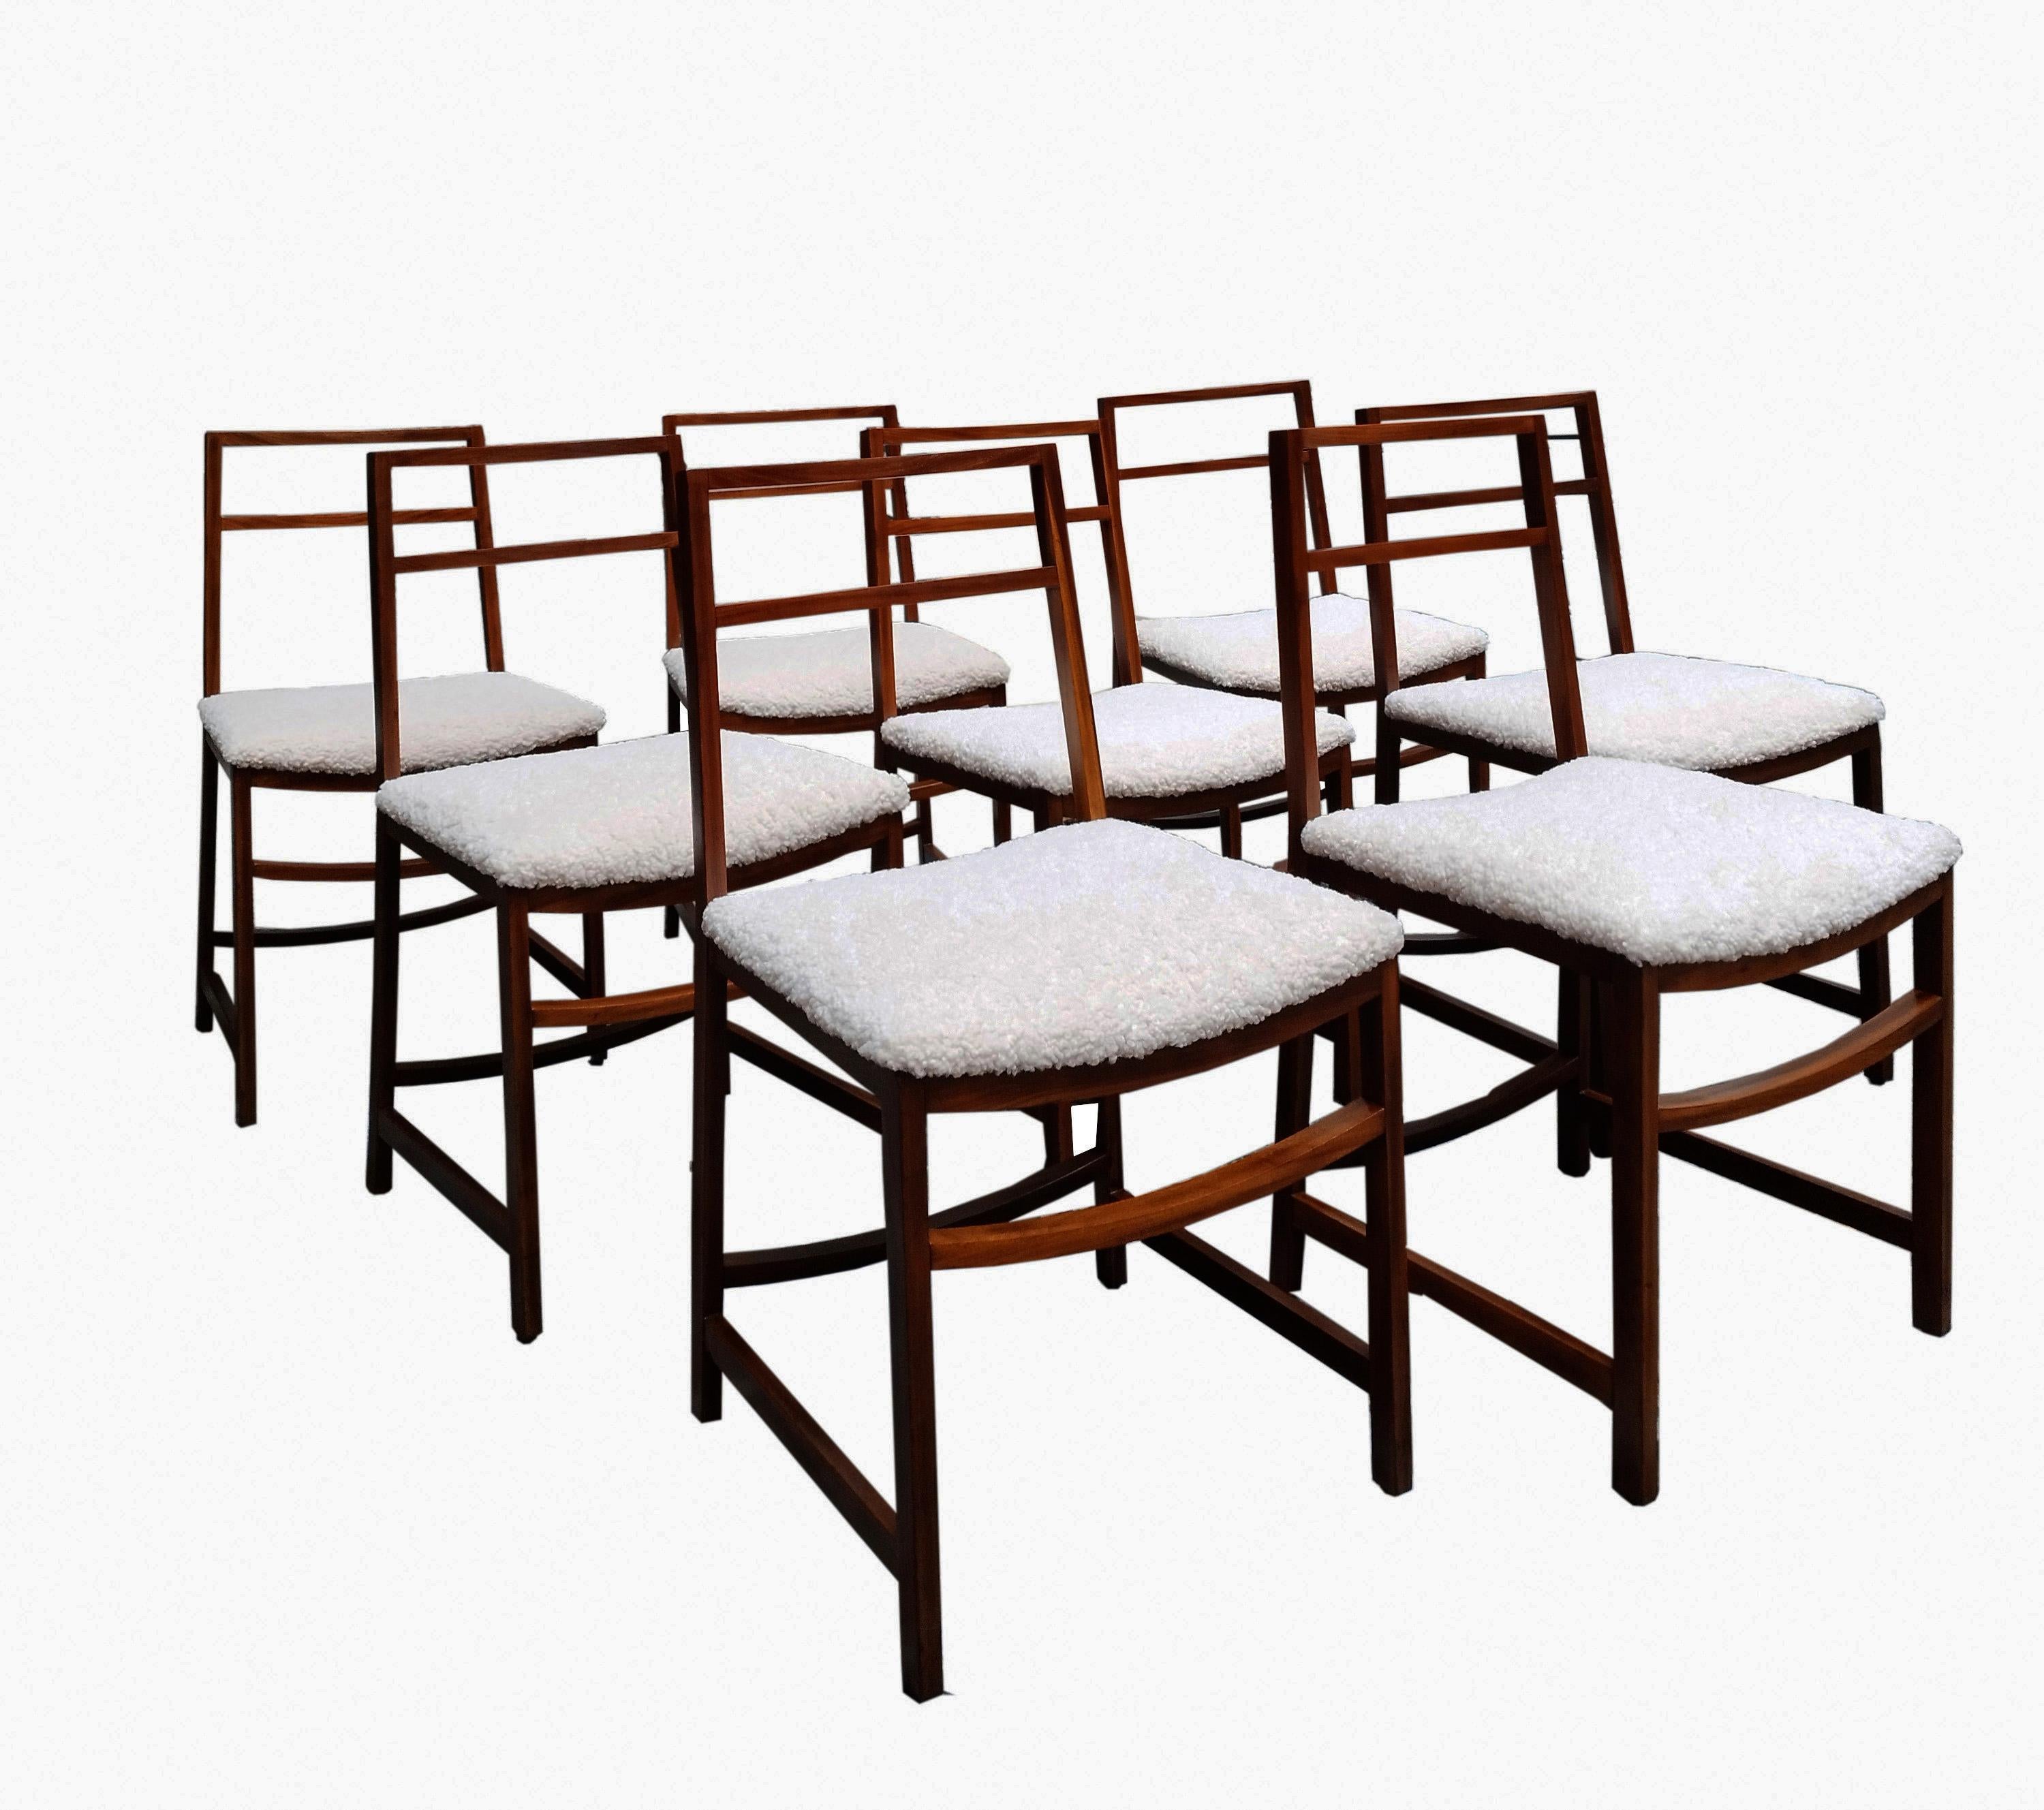 Chairs in wood and boucle fabric by Renato Venturi who designed these extraordinary chairs for MIM Rome in 1960s Italy. These fantastic chairs have a solid wood frame and beautifully new ivory boucle'fabric seats. Comes with the original MIM Roma